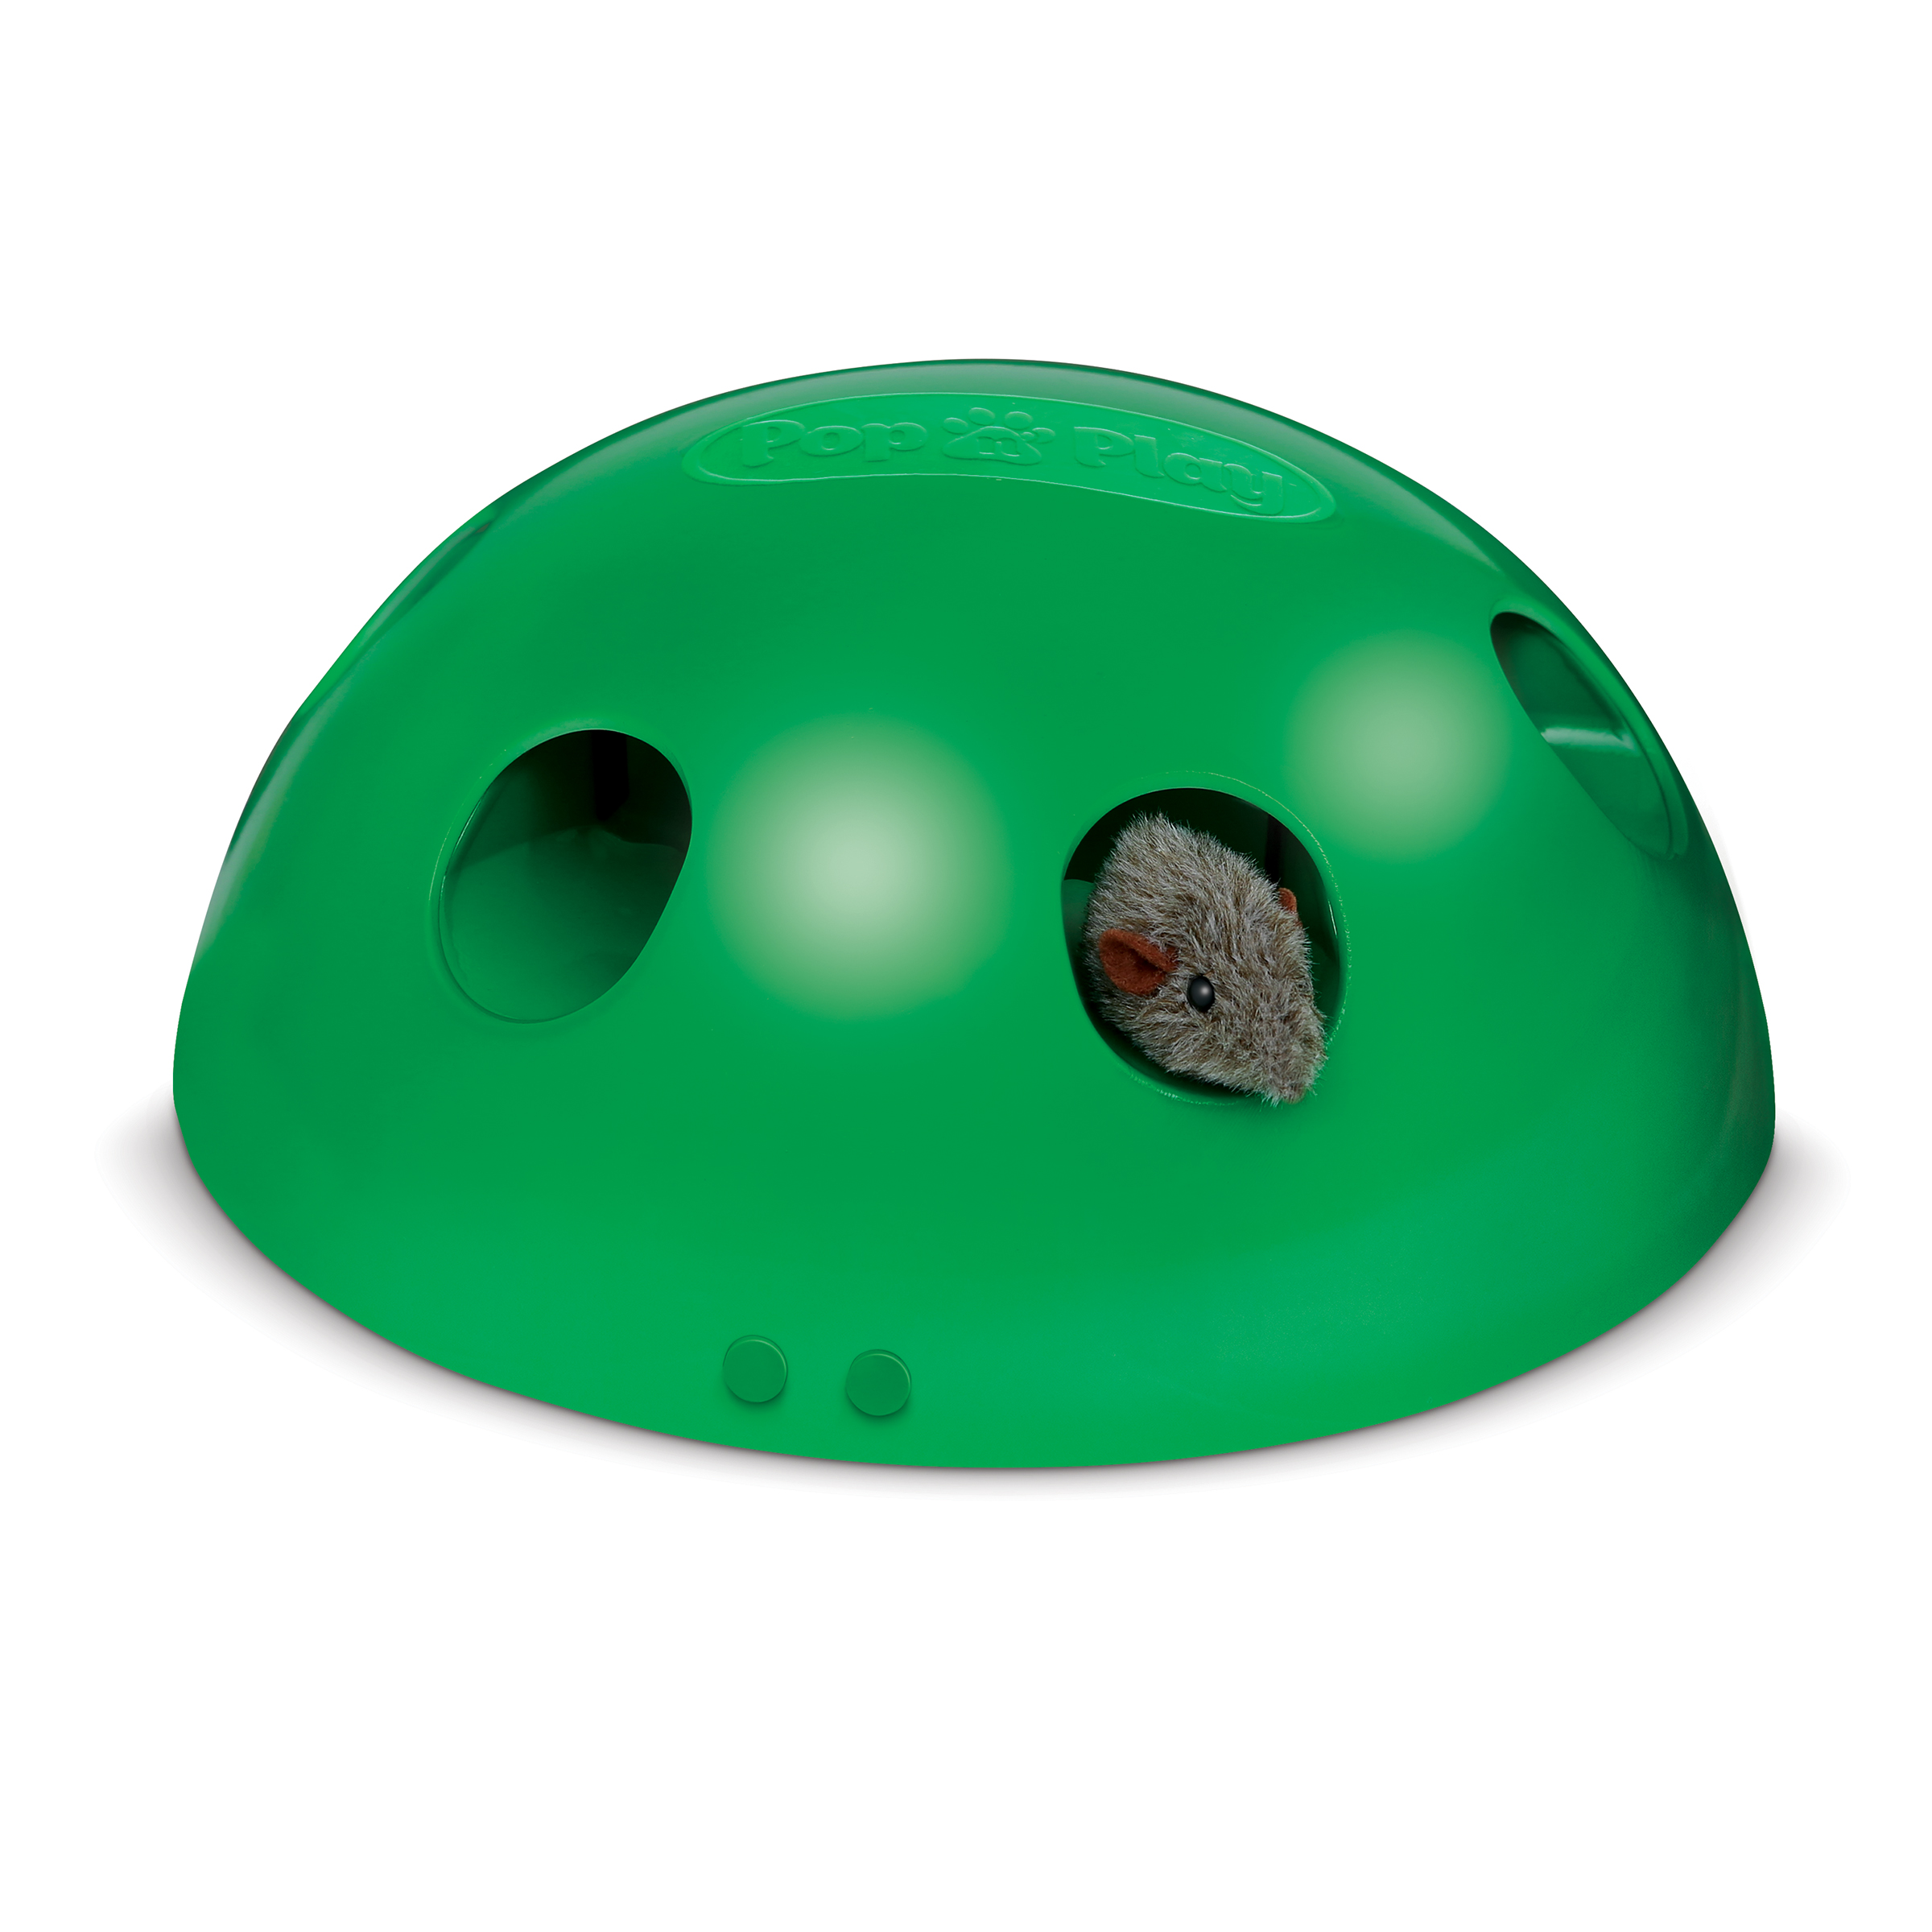 Green Cat Toy Peek-A-Boo Pets Know Best